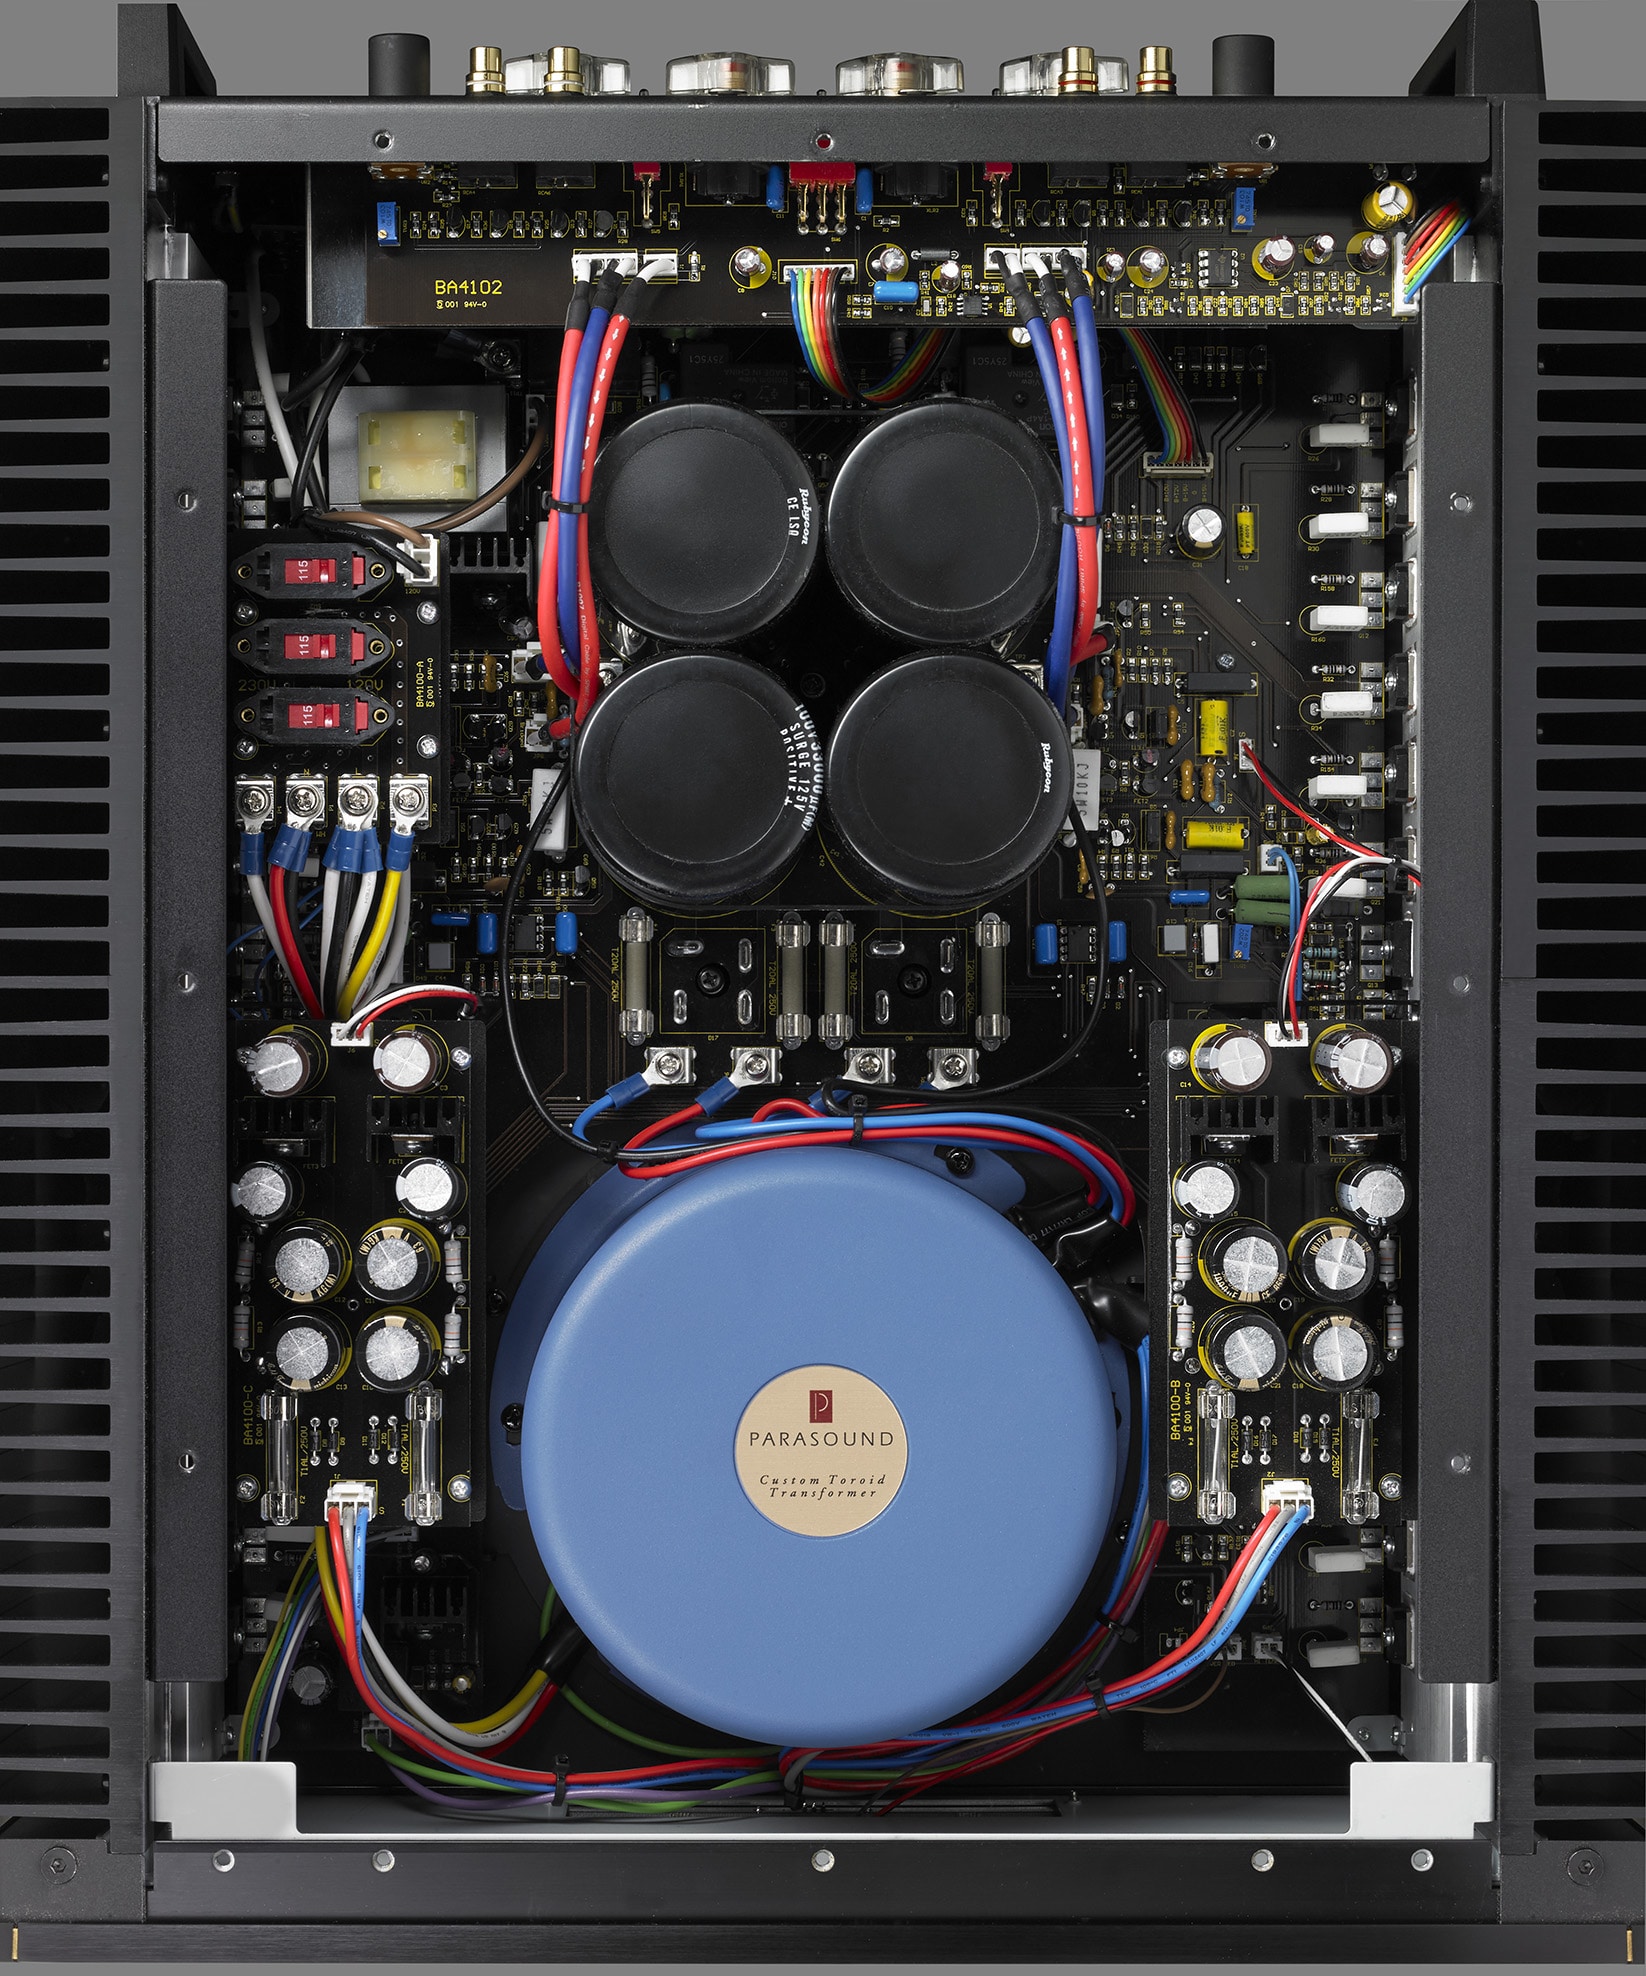 Halo JC5 stereo power amplifier From Parasound